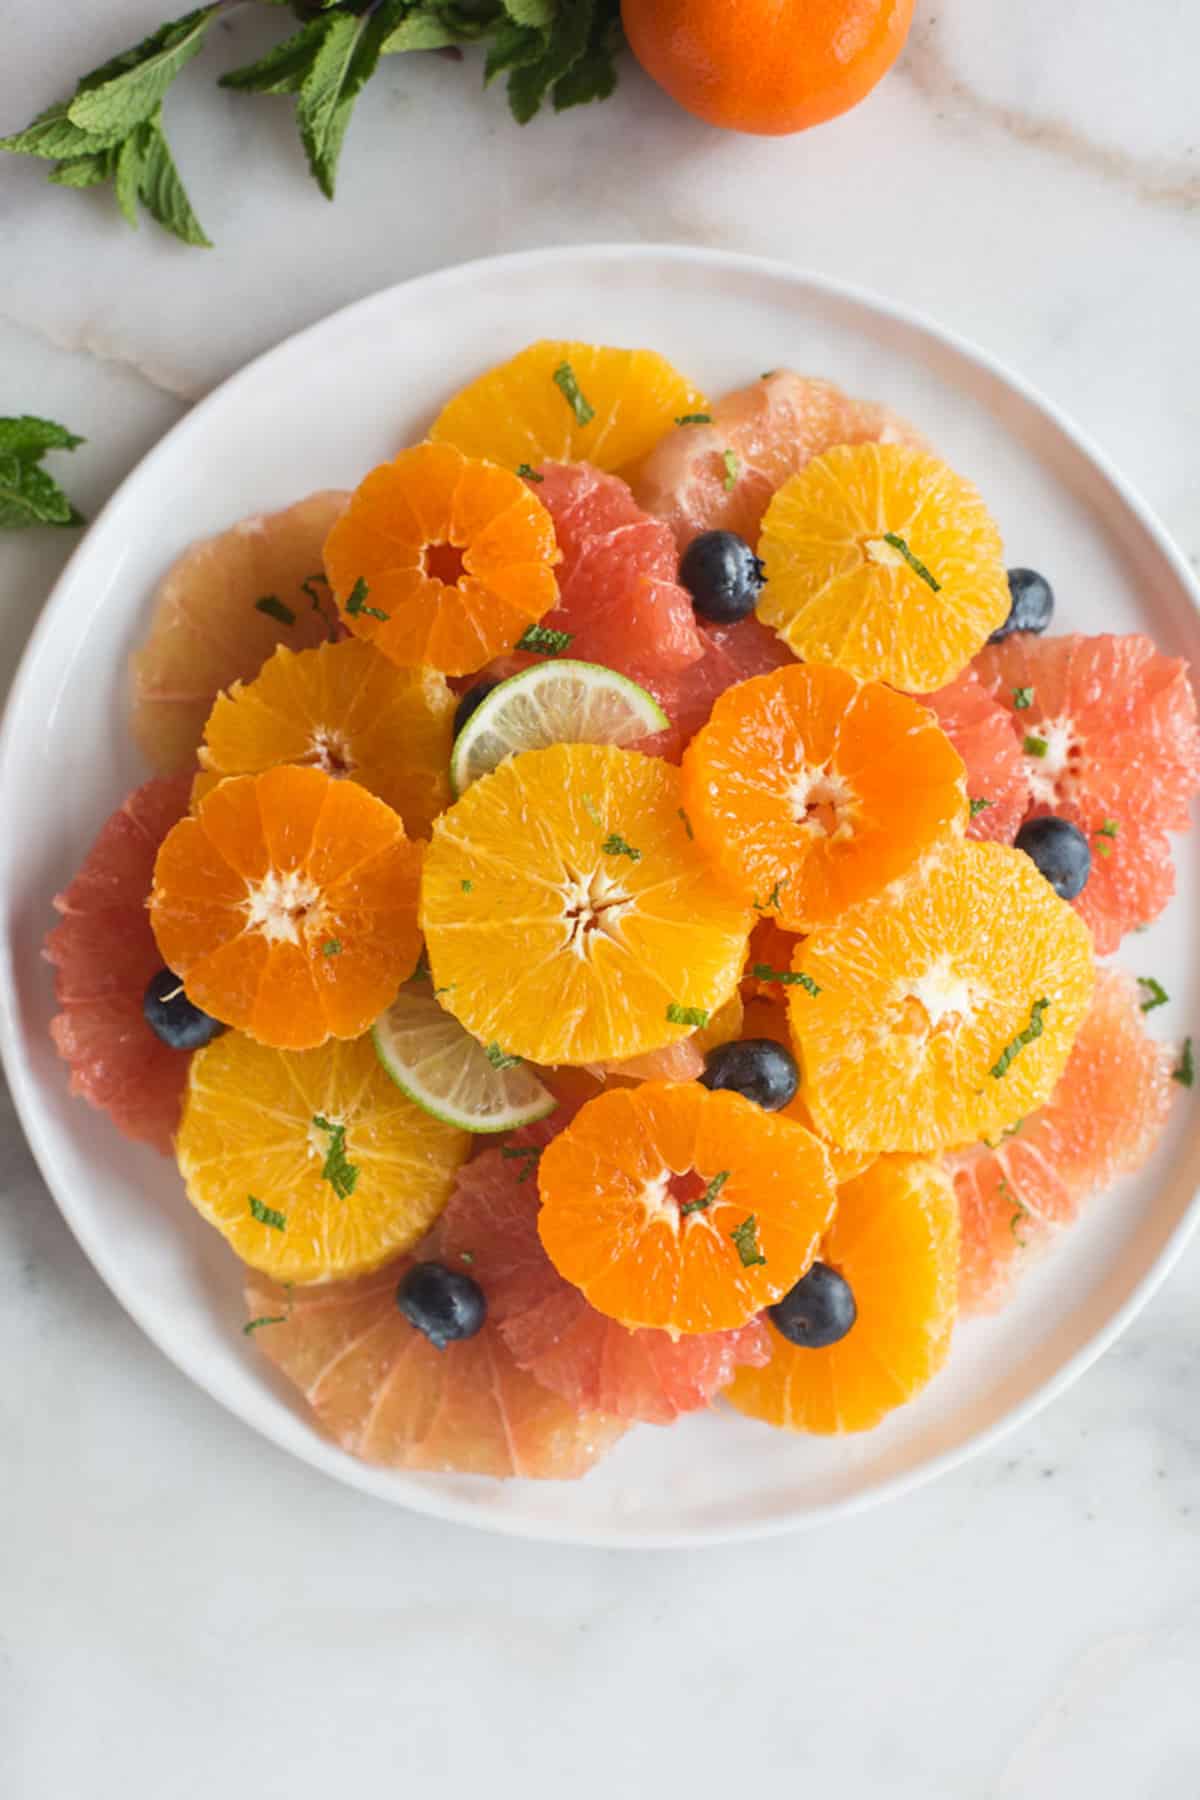 A white plate filled with layered slices of citrus fruits including ornages, grapefruit, and clementines. Topped with blueberries, slices of lime, and fresh mint.